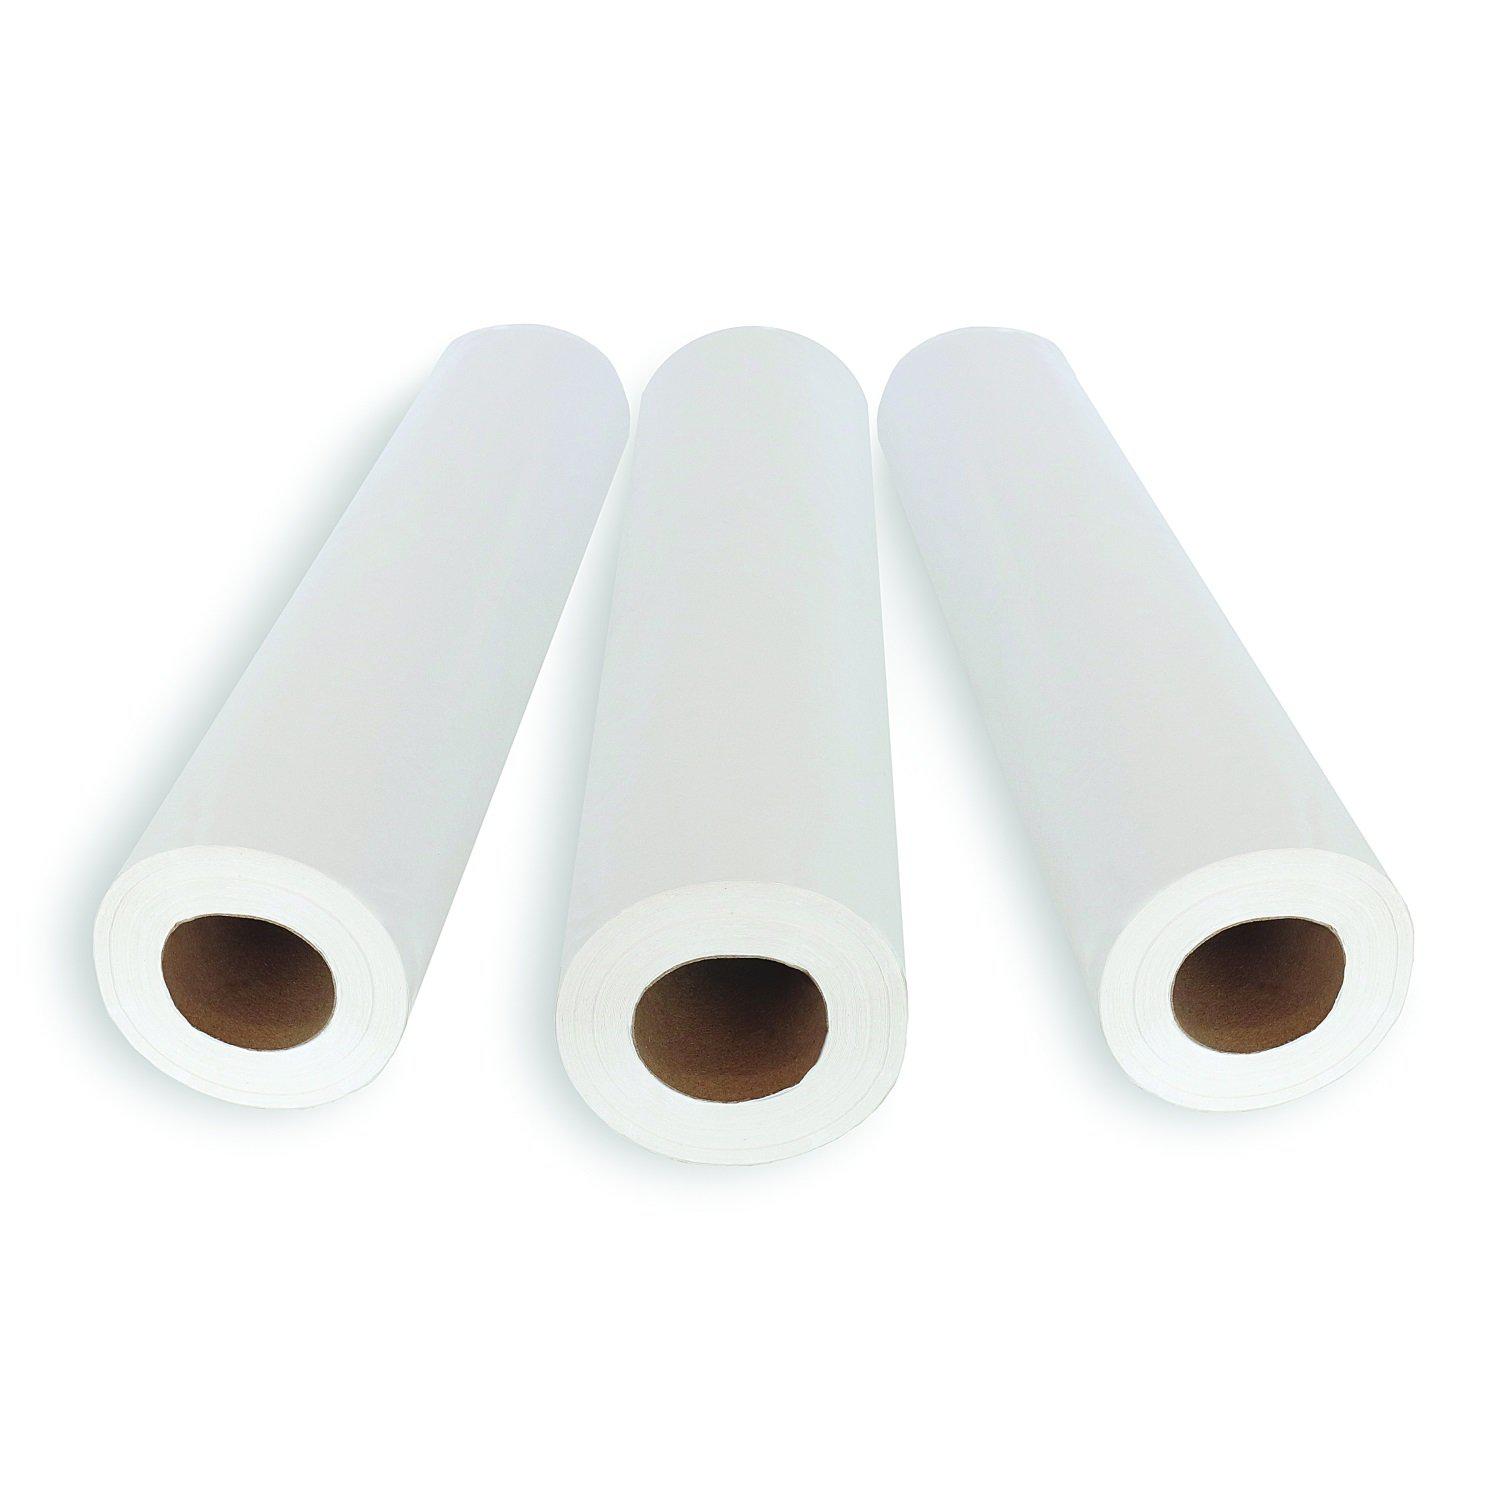 Hygienic Paper Rolls for Changing Tables, Case of 12 Rolls